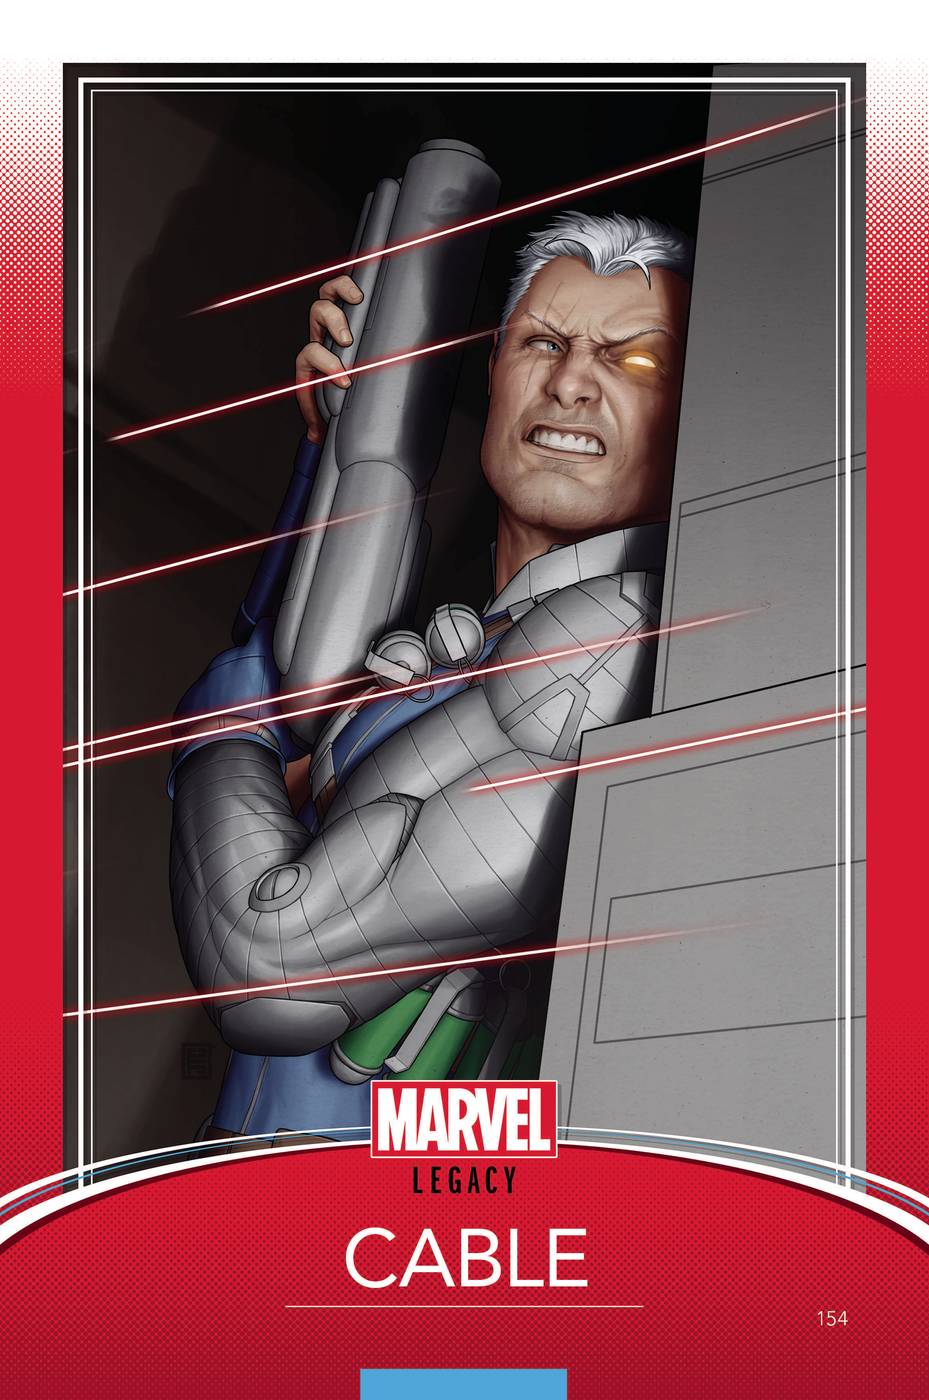 Cable #154 Christopher Trading Card Variant Leg (2016)